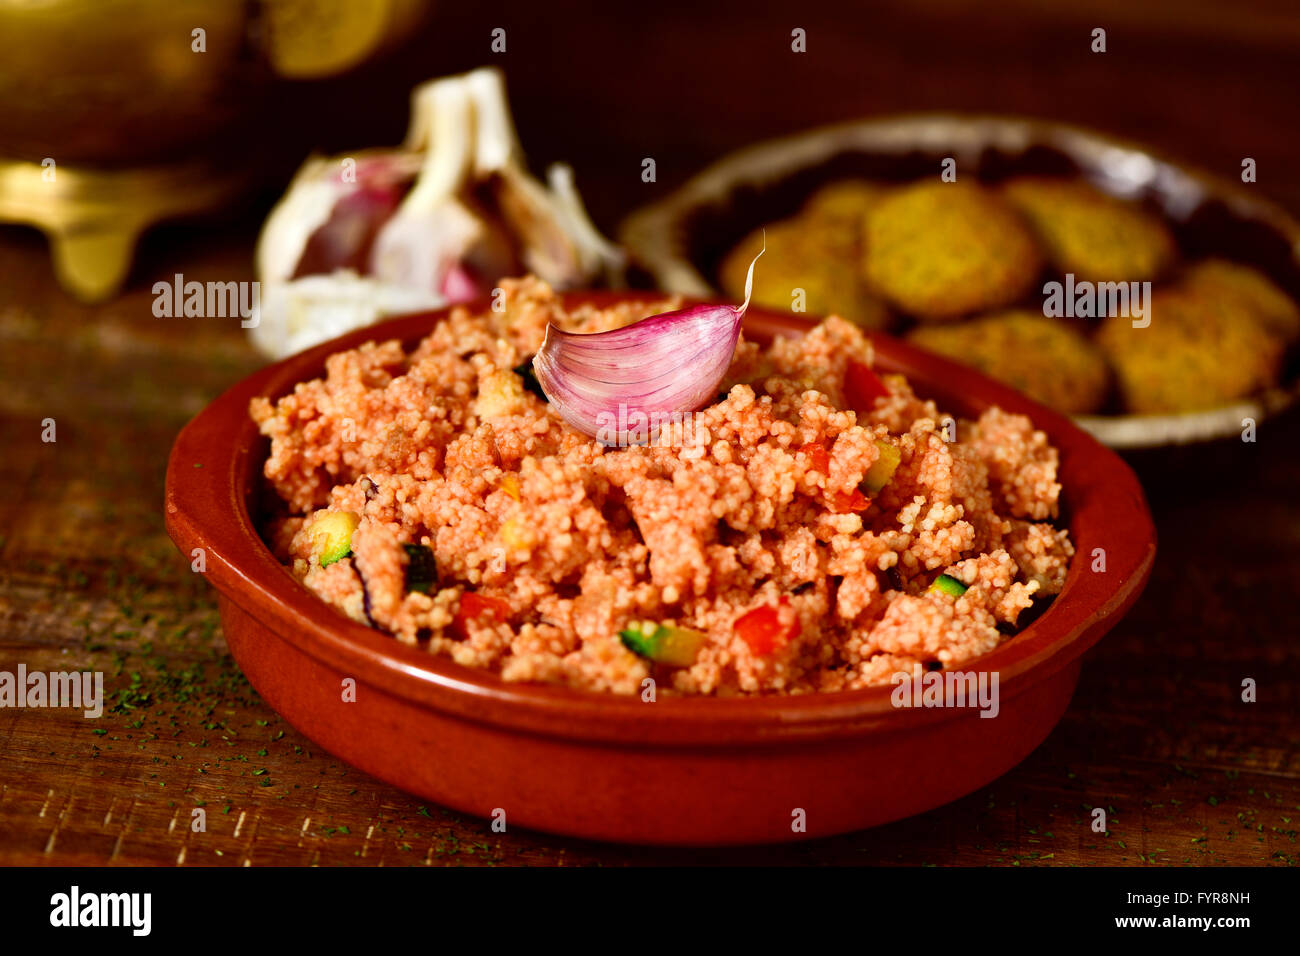 closeup of an earthenware casserole whit couscous with vegetables and some falafel in a plate in the background, on a wooden tab Stock Photo